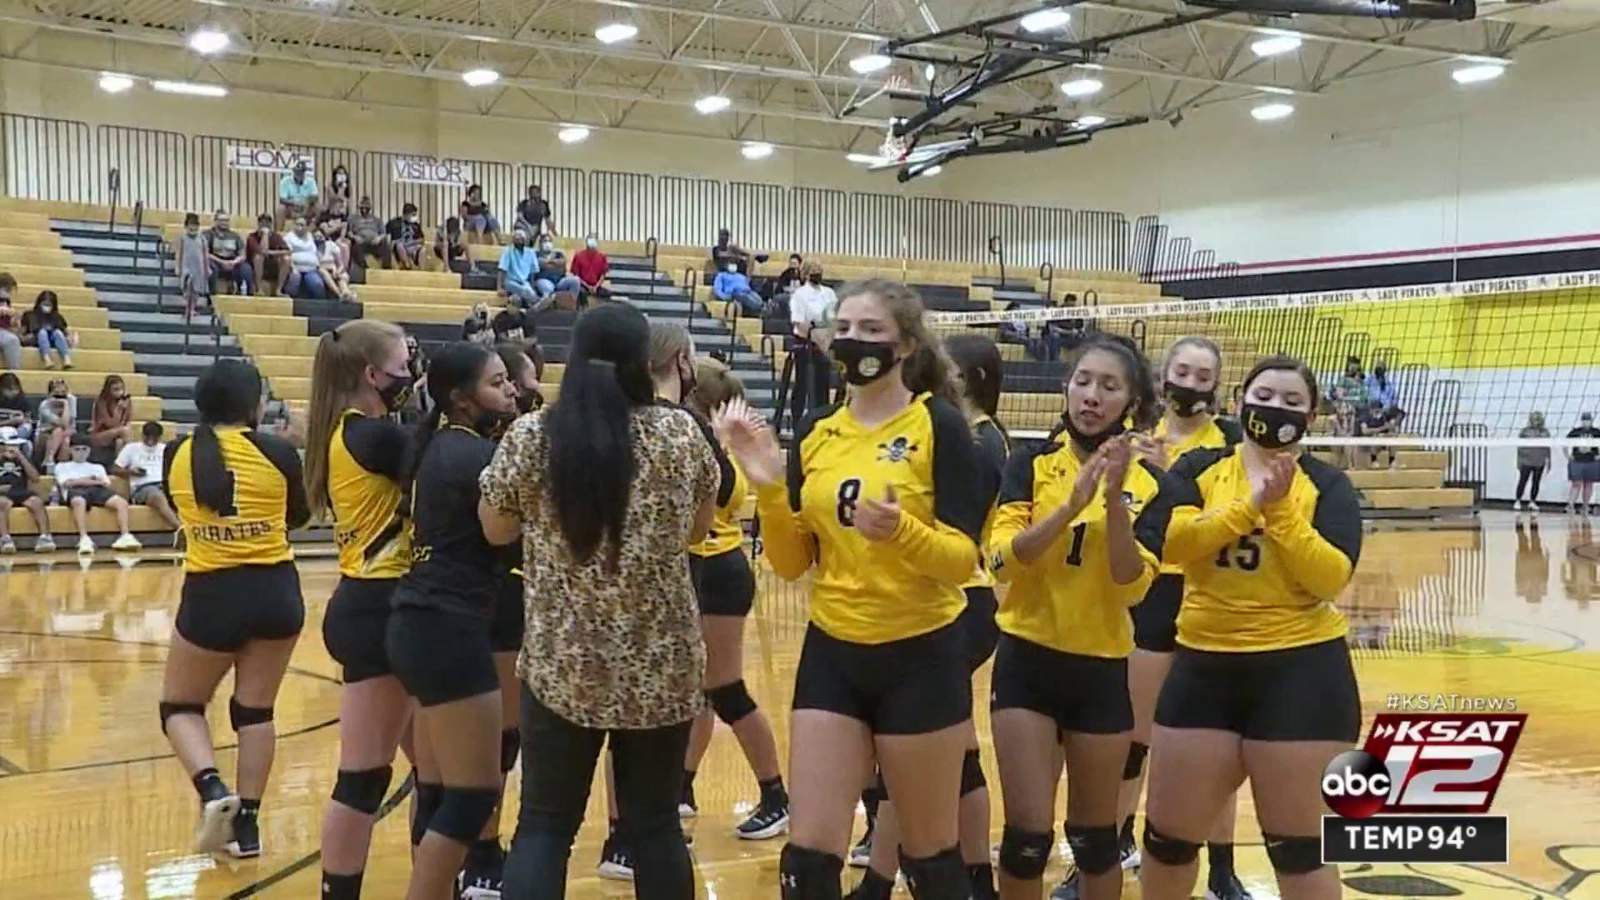 Bandera, Lytle volleyball teams discuss return to play with COVID-19 restrictions in place